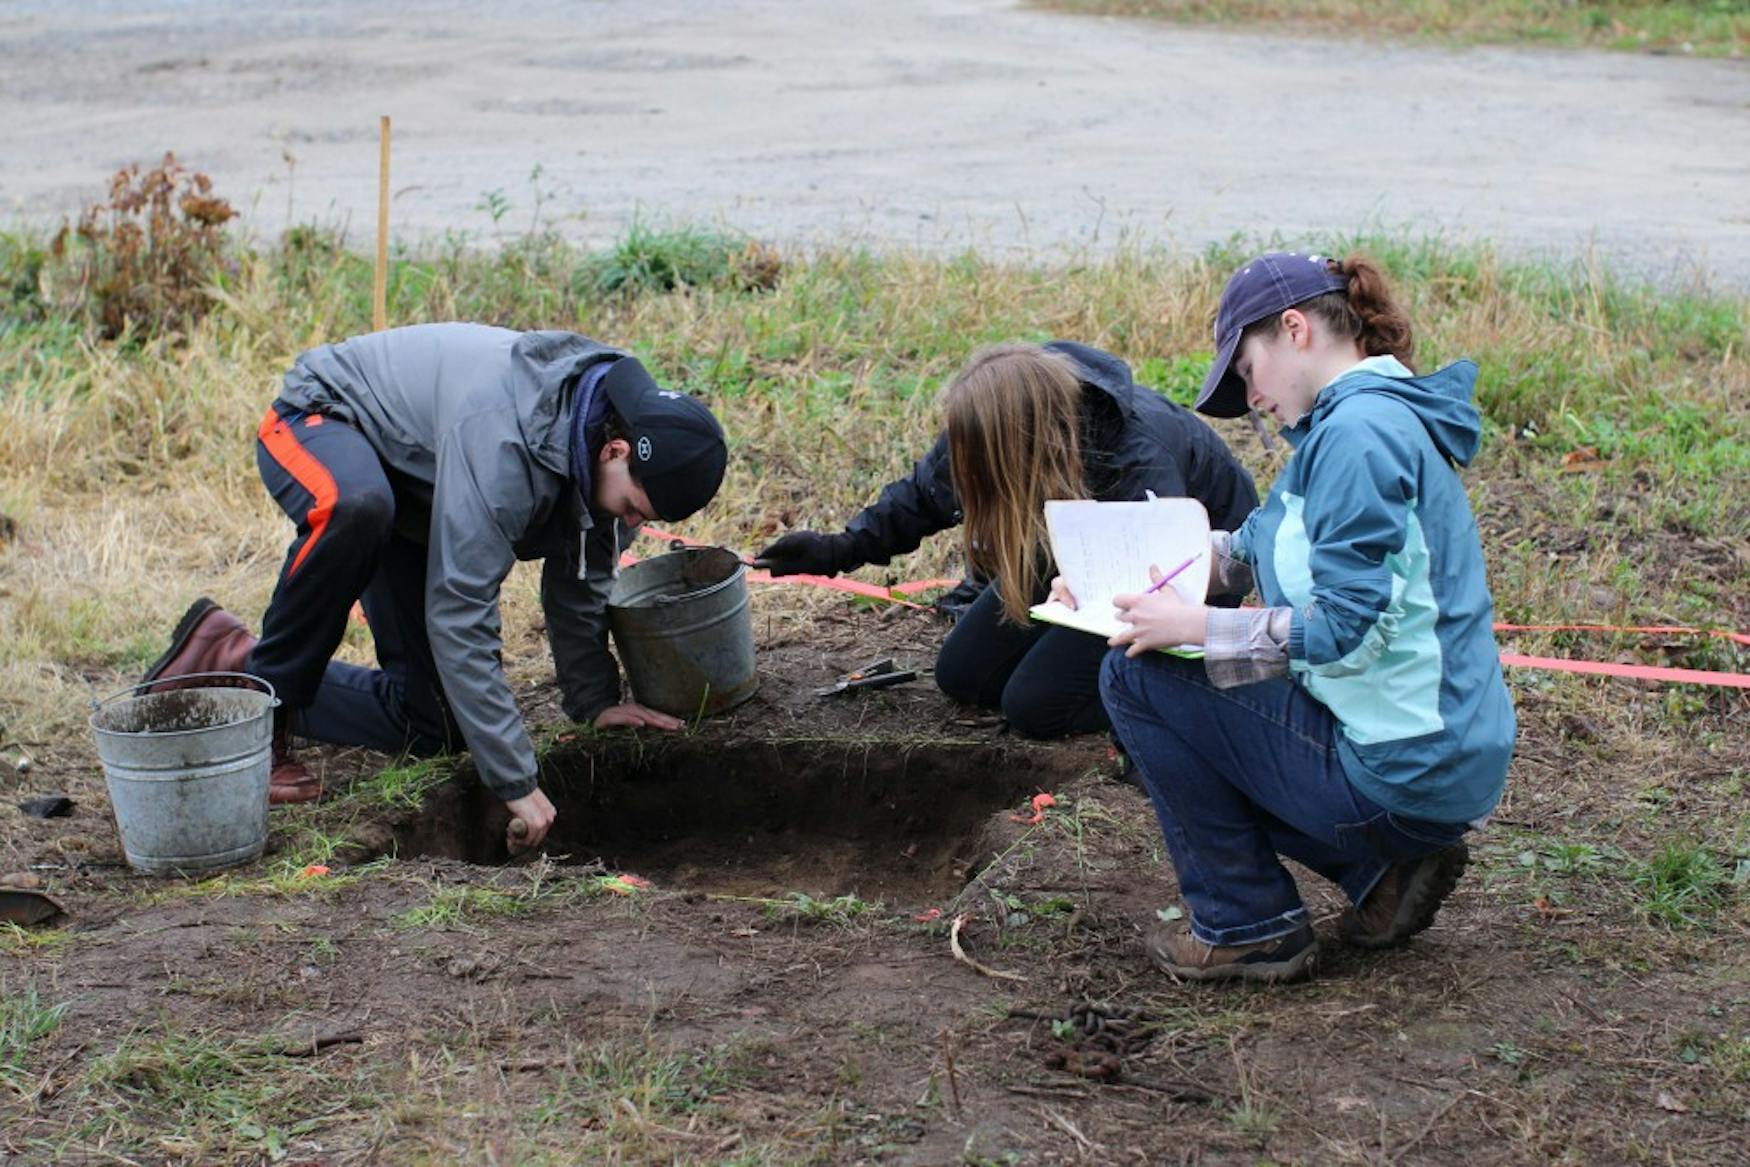 THE HOLE STORY: Brandeis students excavate the historic McGrath farm in Concord, in search of artifacts from several different time periods.